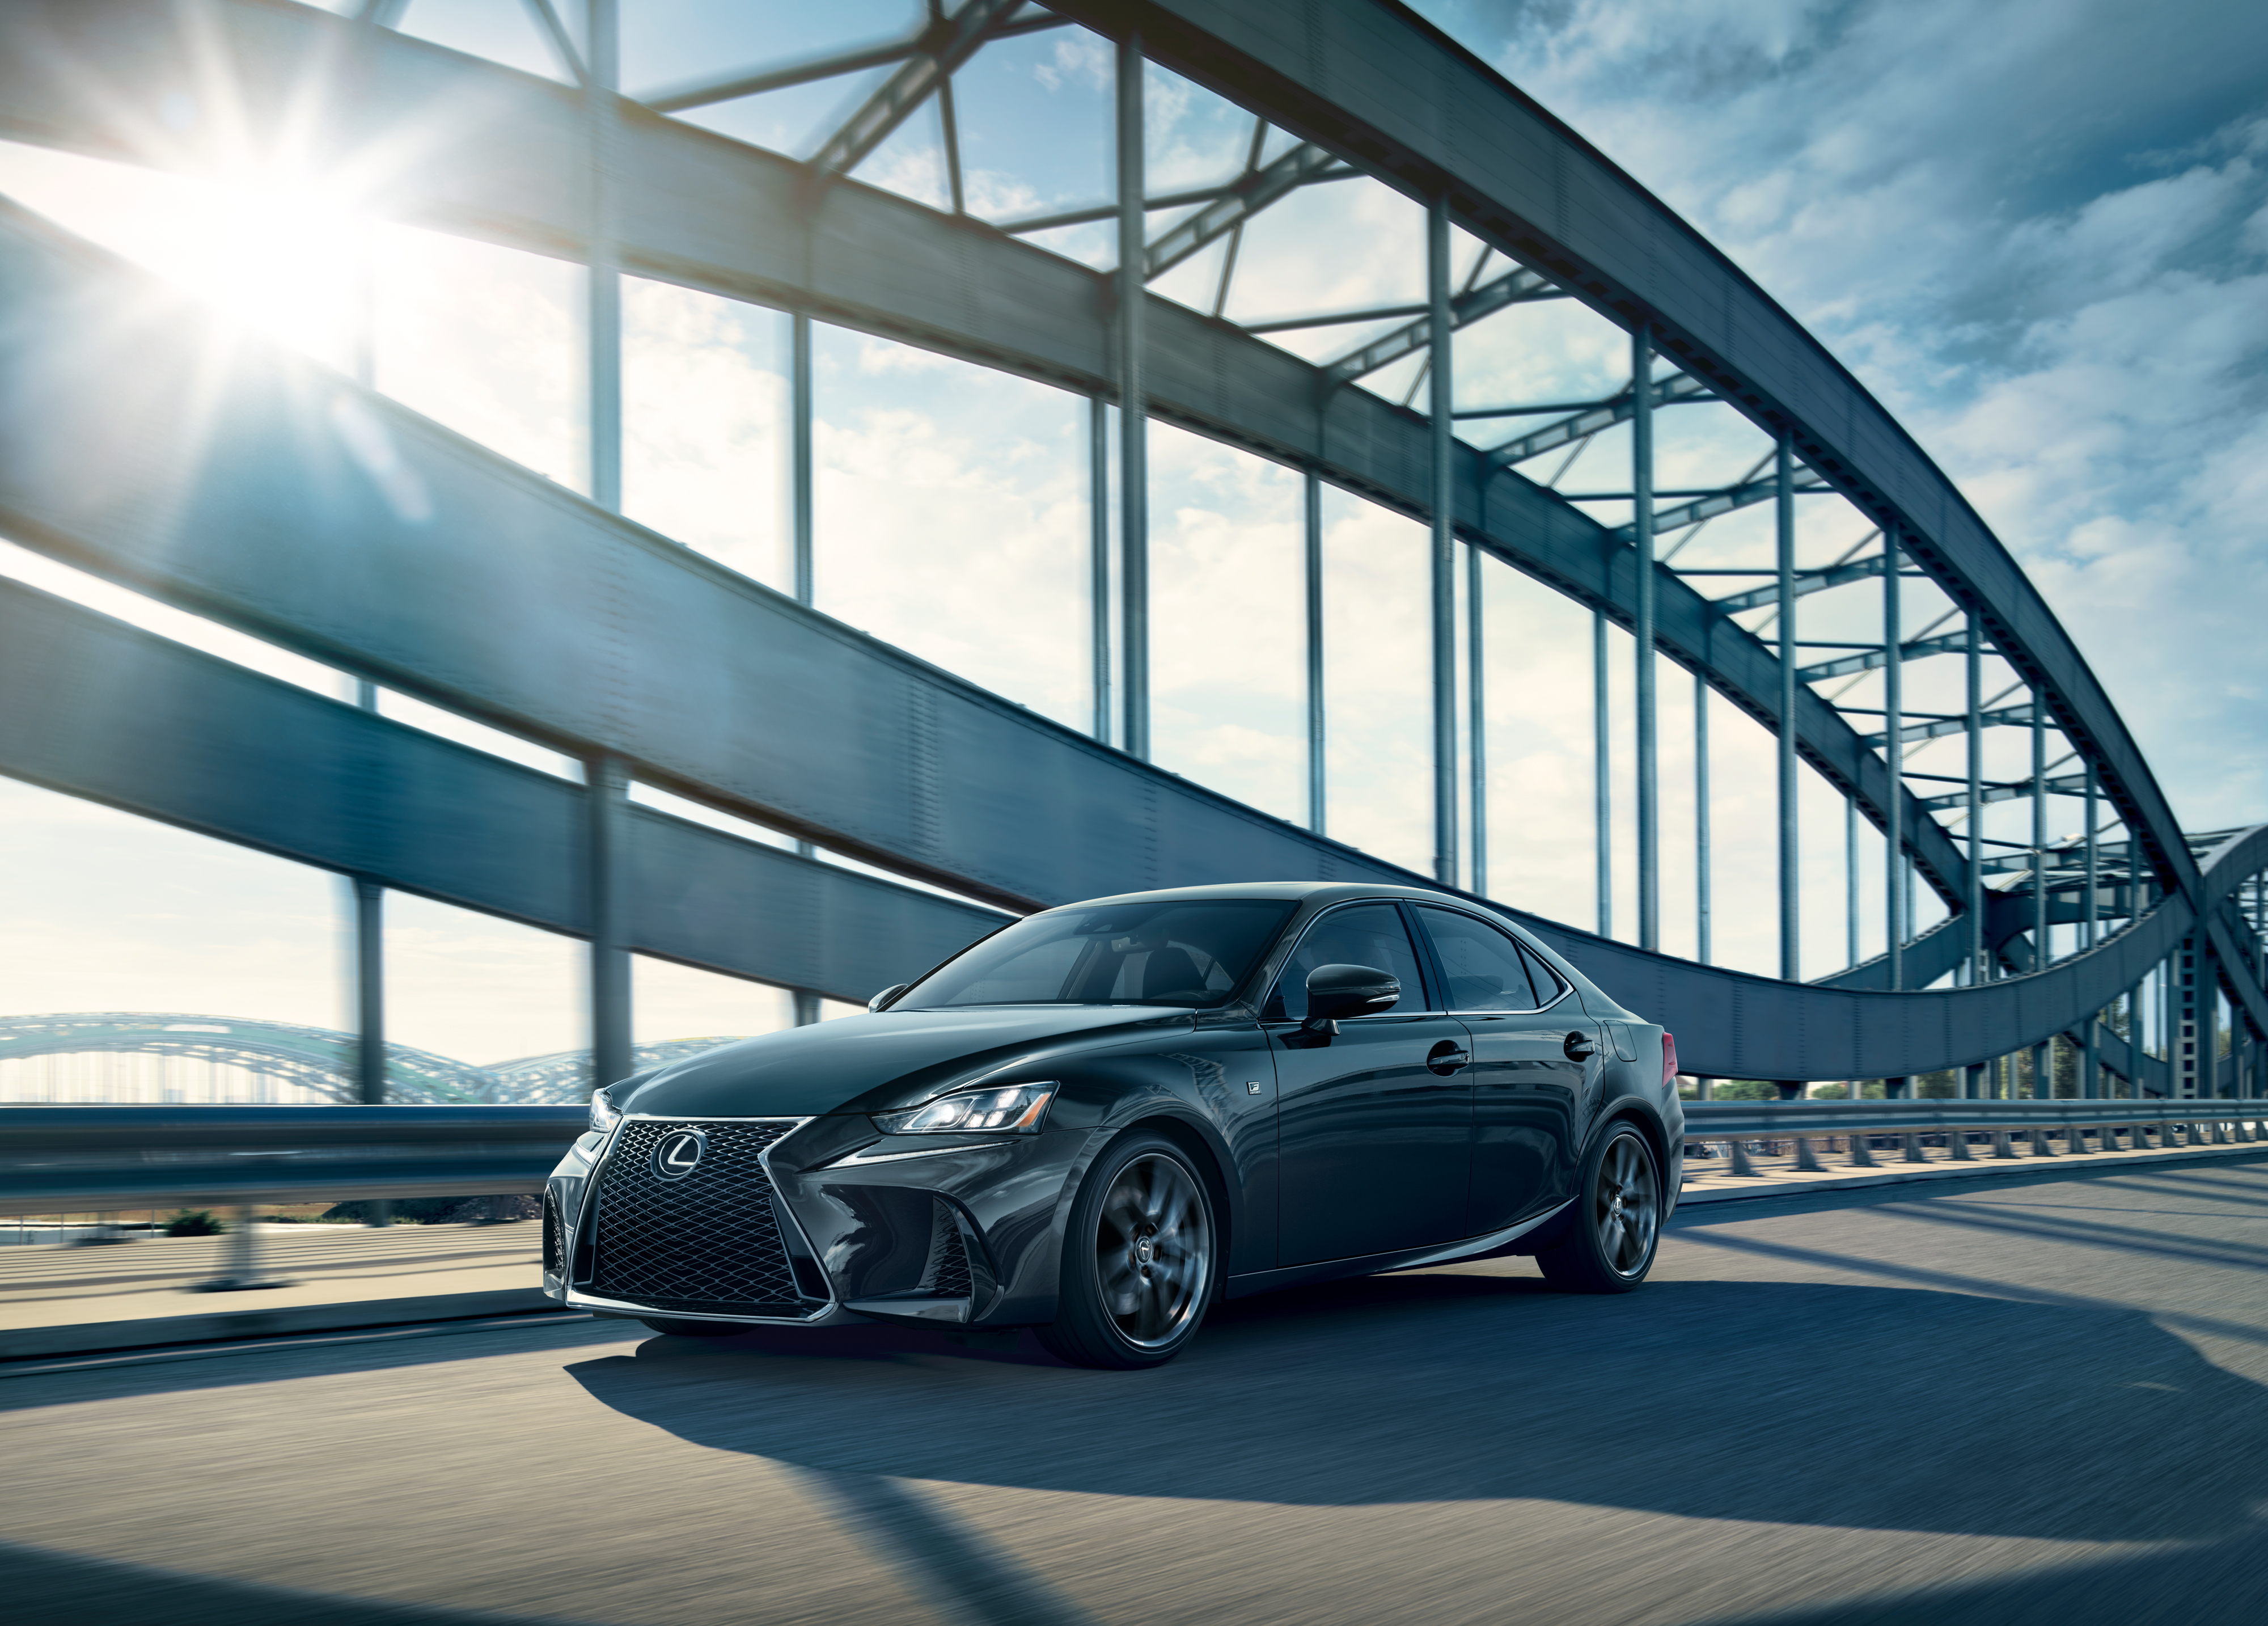 2020 Lexus Is F Sport Blackline Special Edition Limited To 900